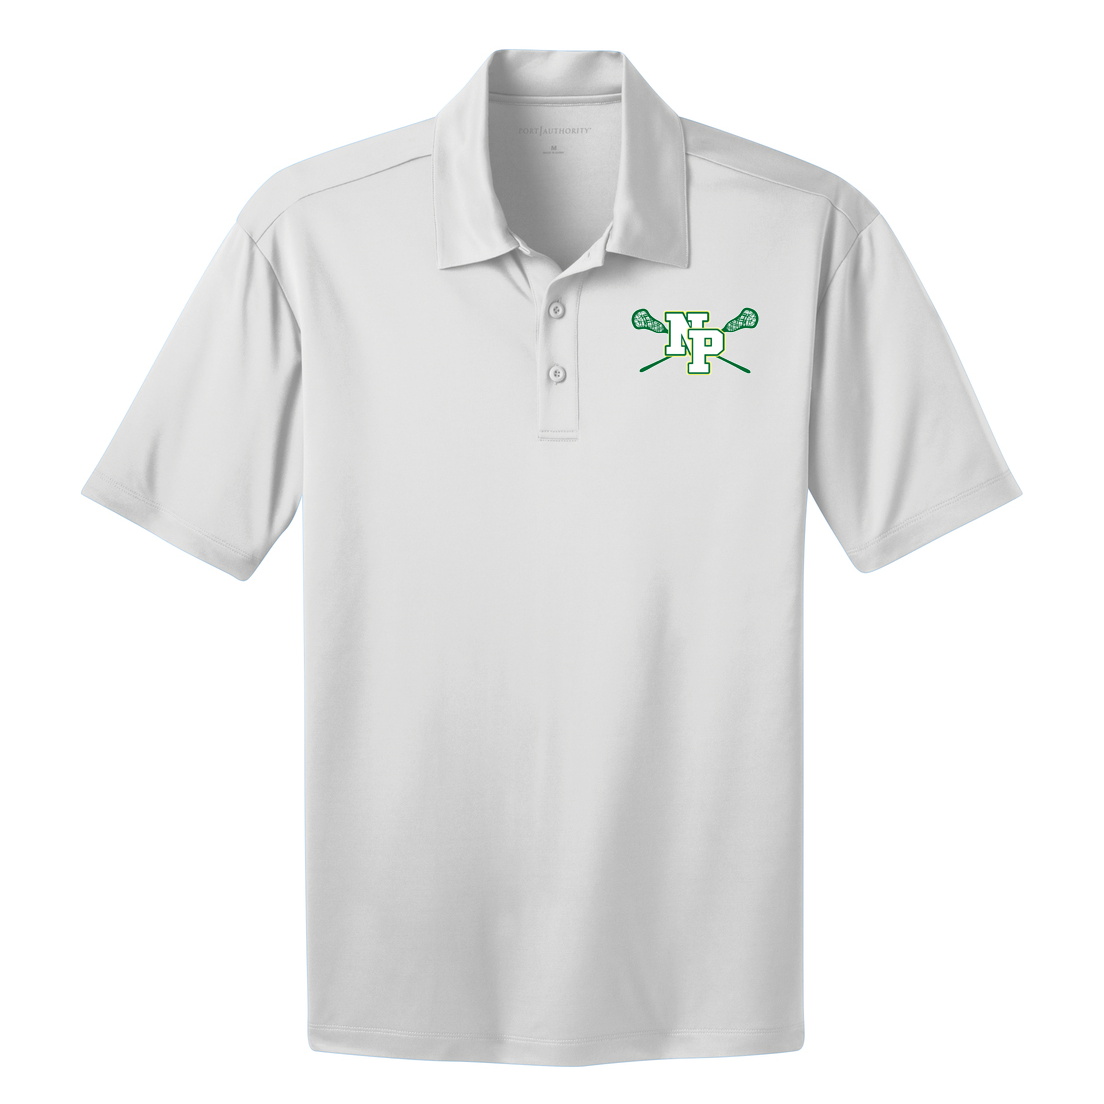 New Providence Lacrosse Polo